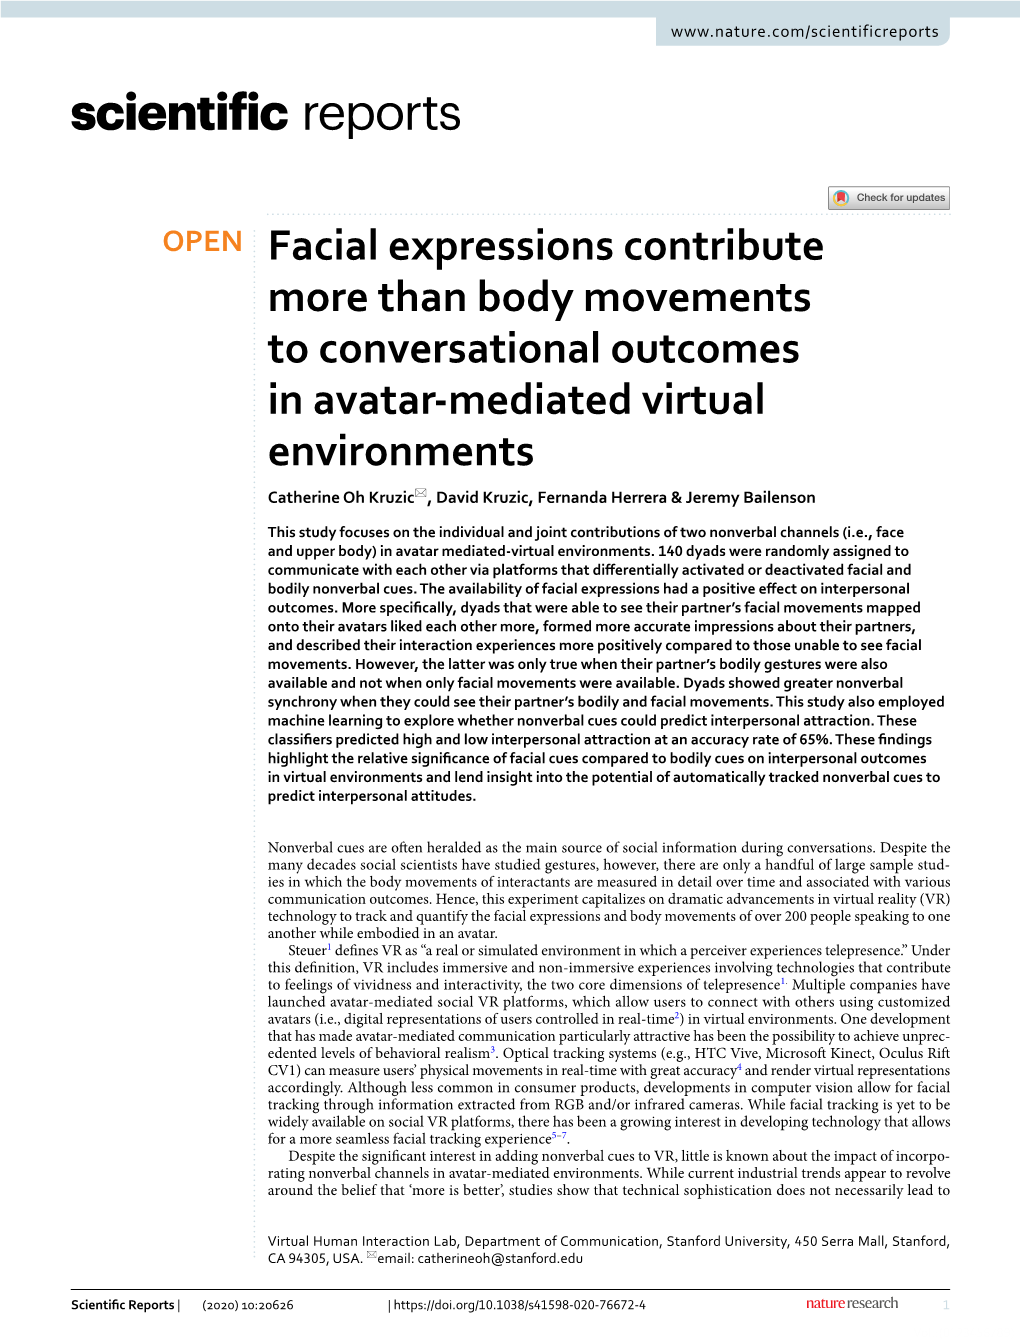 Facial Expressions Contribute More Than Body Movements To